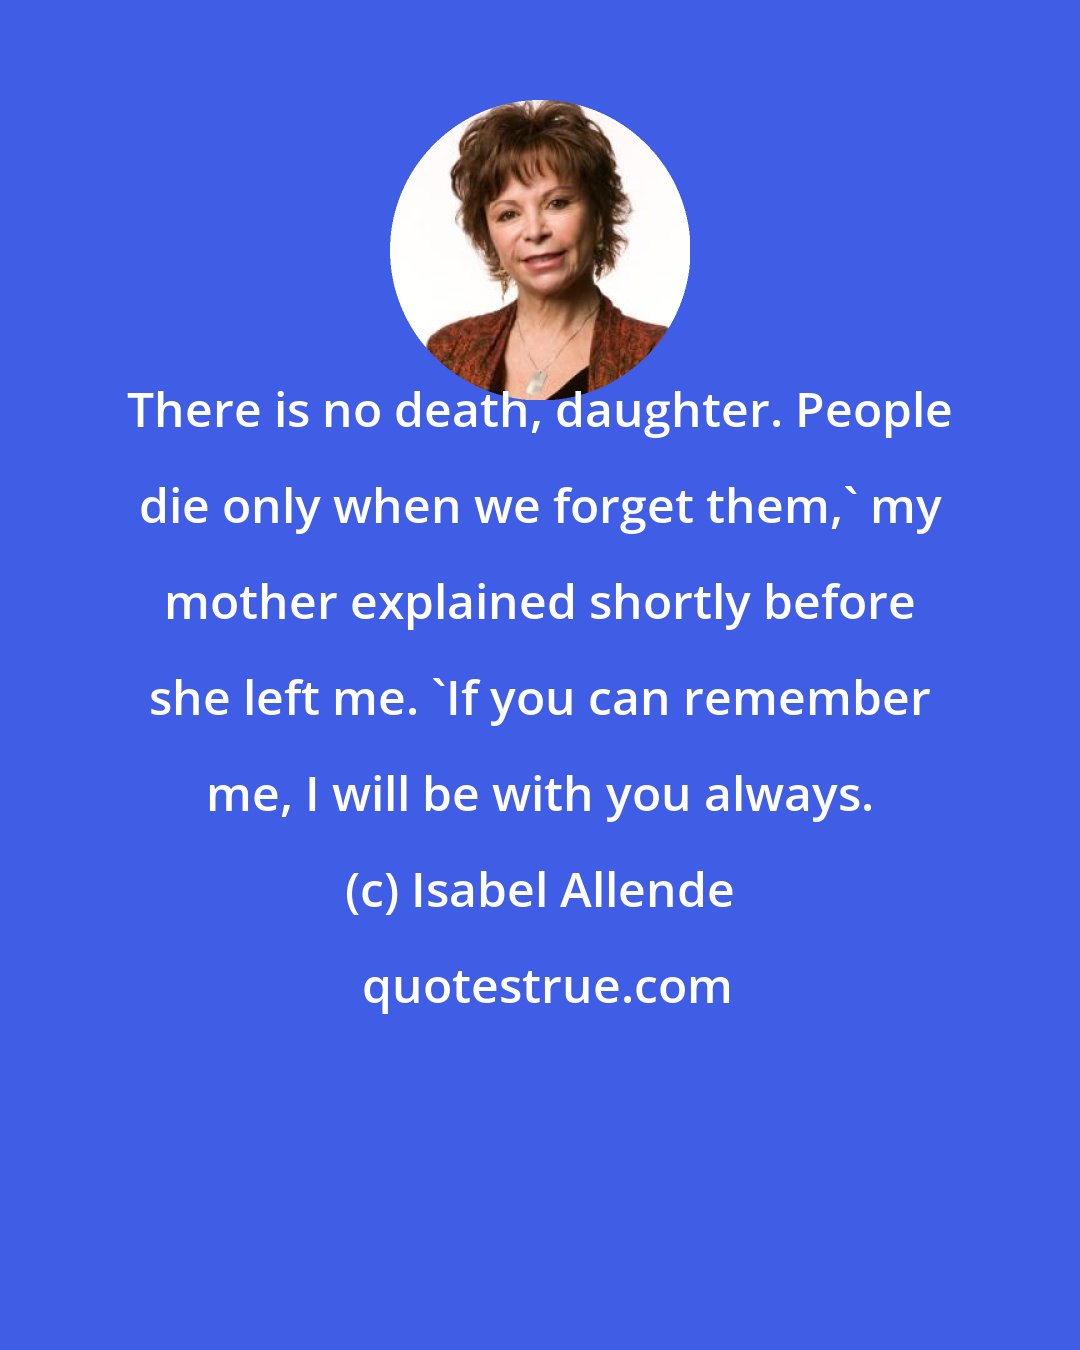 Isabel Allende: There is no death, daughter. People die only when we forget them,' my mother explained shortly before she left me. 'If you can remember me, I will be with you always.